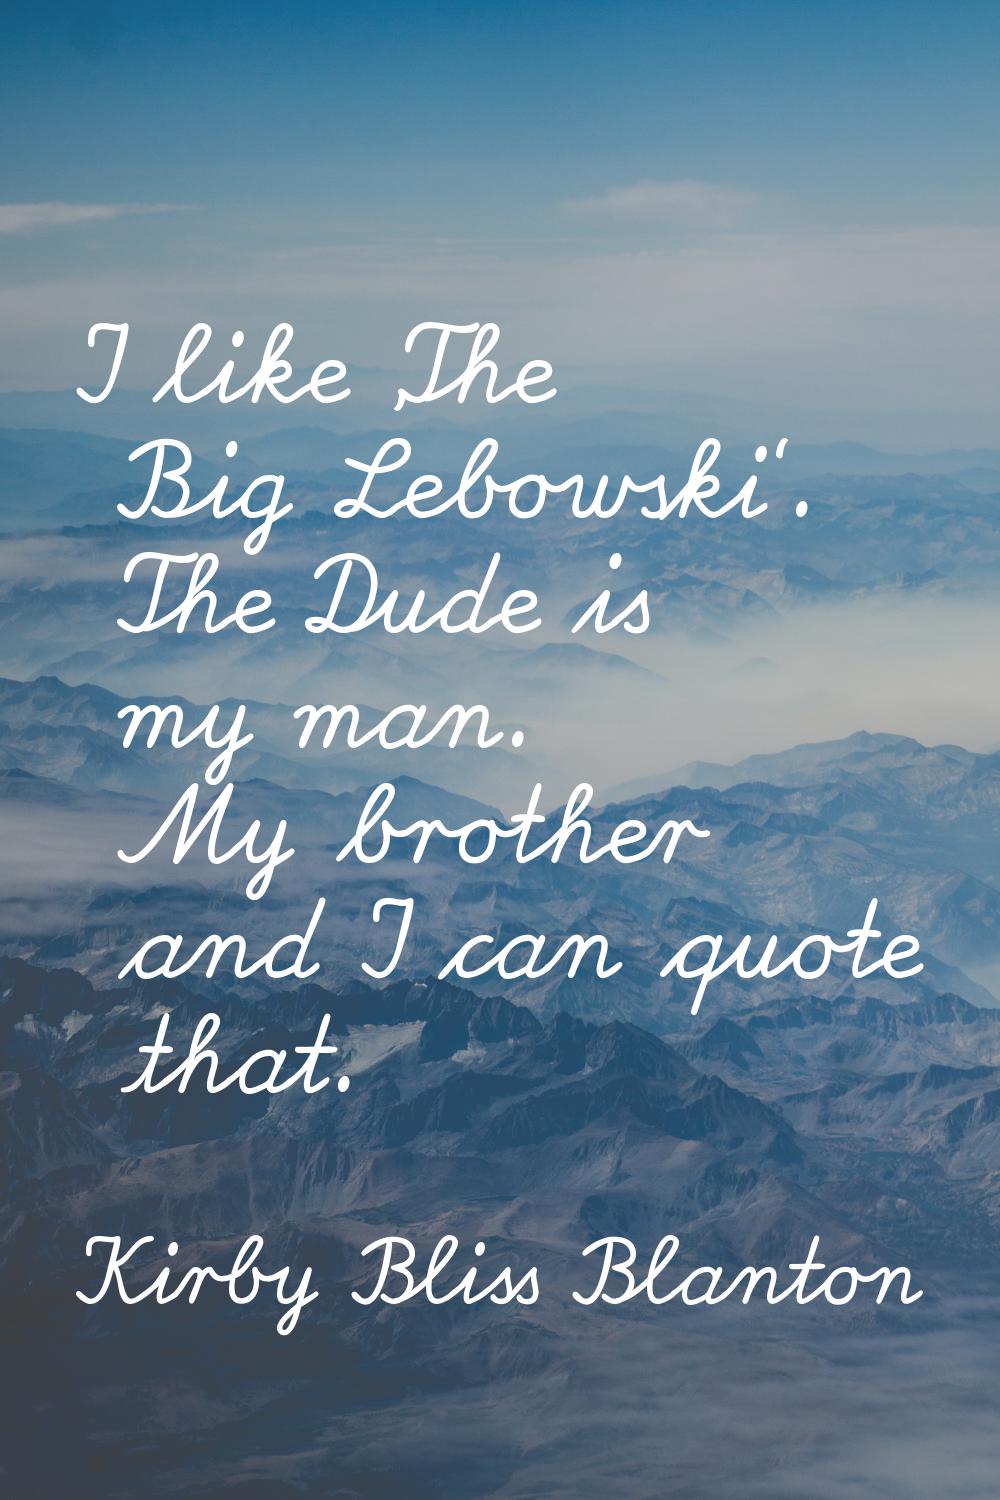 I like 'The Big Lebowski'. The Dude is my man. My brother and I can quote that.